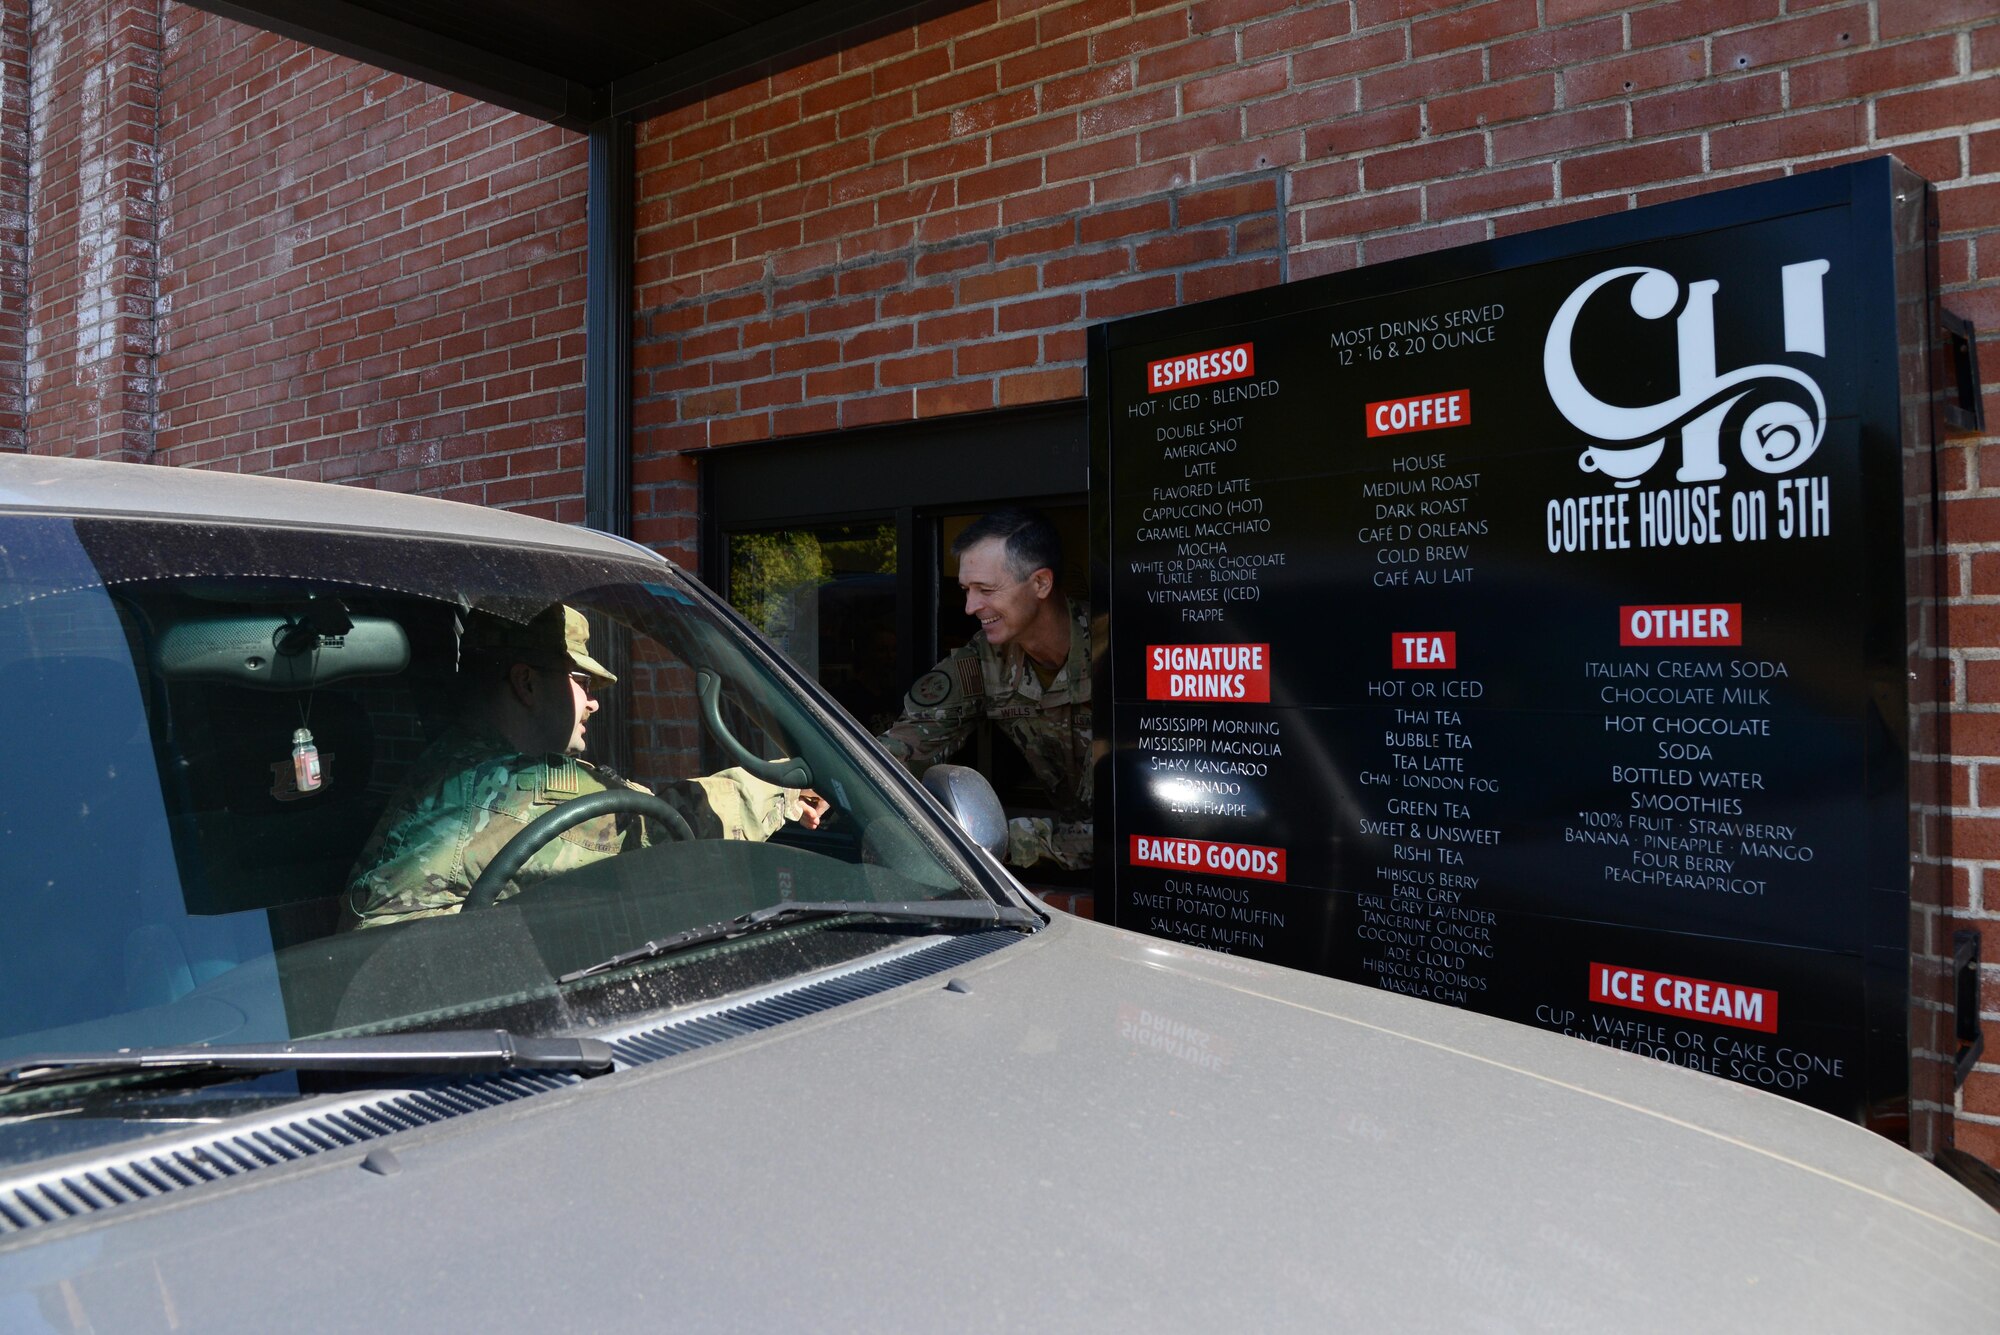 Maj. Gen. Wills, 19th Air Force commander, coins Master Sgt. Christopher Palmer, 14th Contracting Squadron flight chief, through the drive through window of the Coffee House on 5th during a visit to Columbus AFB, Miss., Oct. 1, 2019. Throughout Wills’ visit to Columbus AFB, he recognized outstanding members of Team BLAZE for their contributions and actions toward cultivating Airmen, creating pilots and connecting with one another. (U.S. Air Force photo by Airman 1st Class Jake Jacobsen)